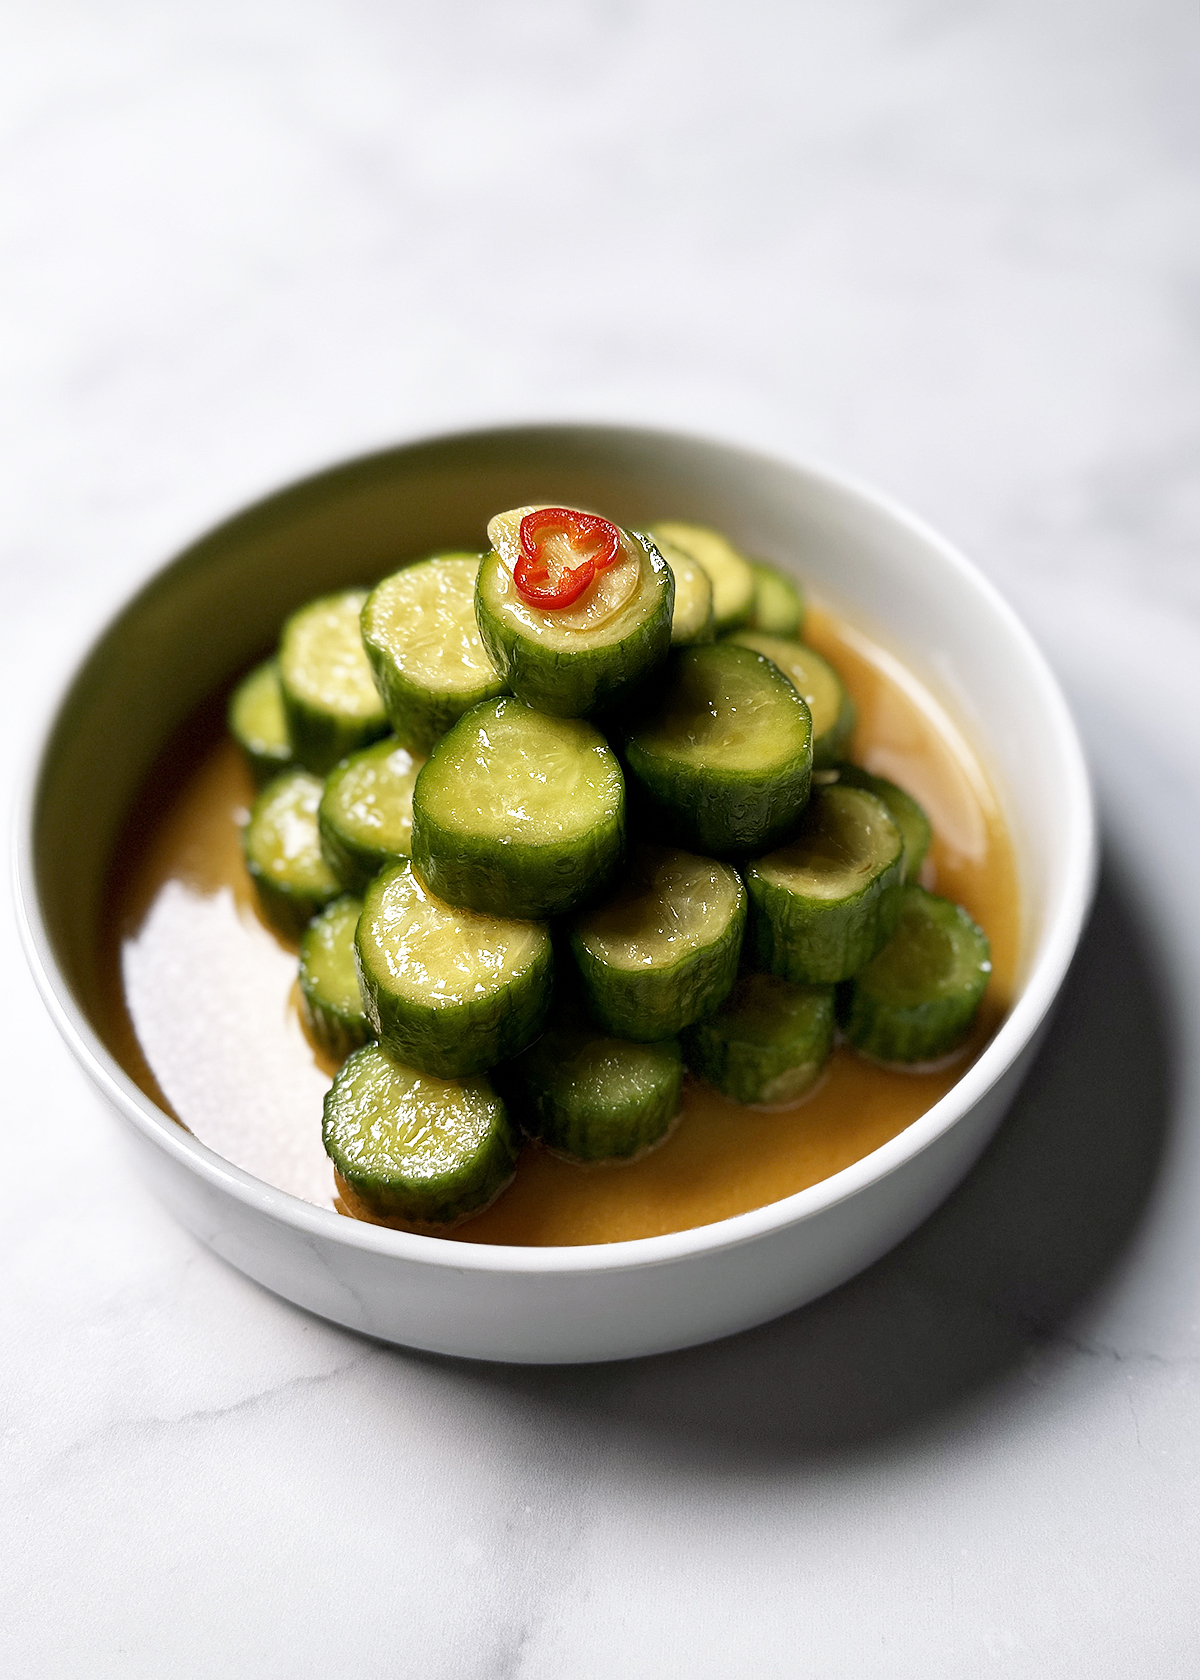 spicy cucumbers din tai fung style stacked in bowl